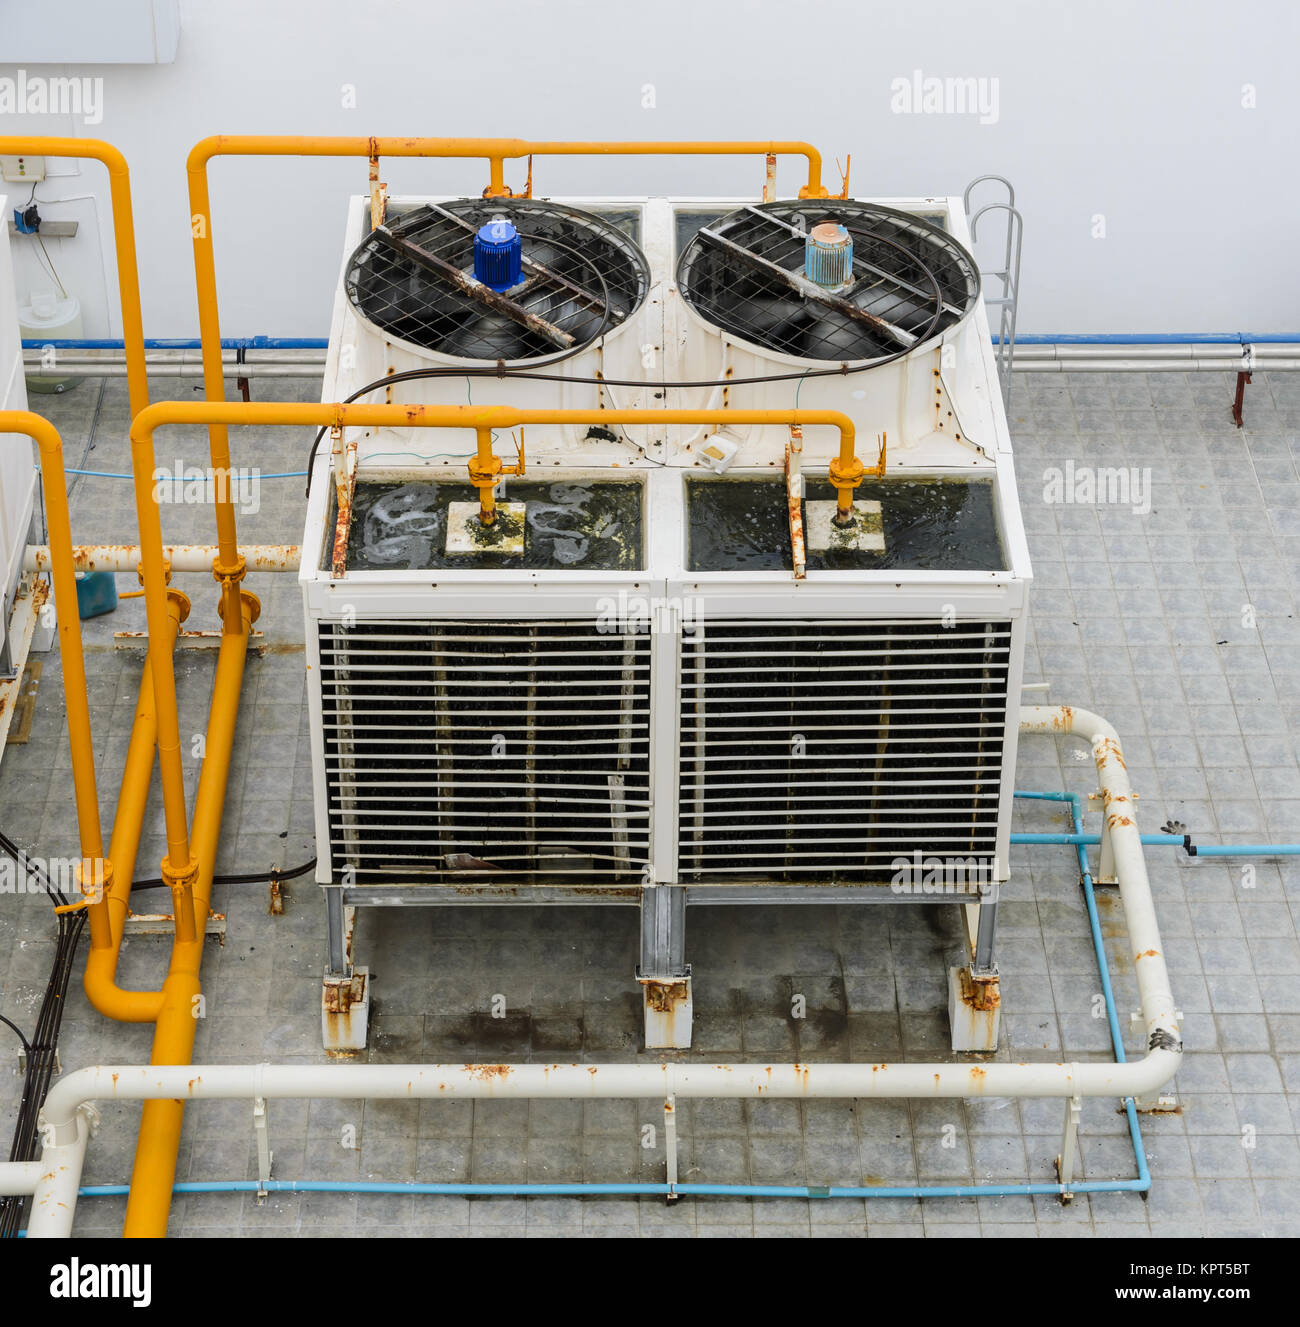 Industrial cooling towers or air cooled water chillers with piping system  on building rooftop Stock Photo - Alamy